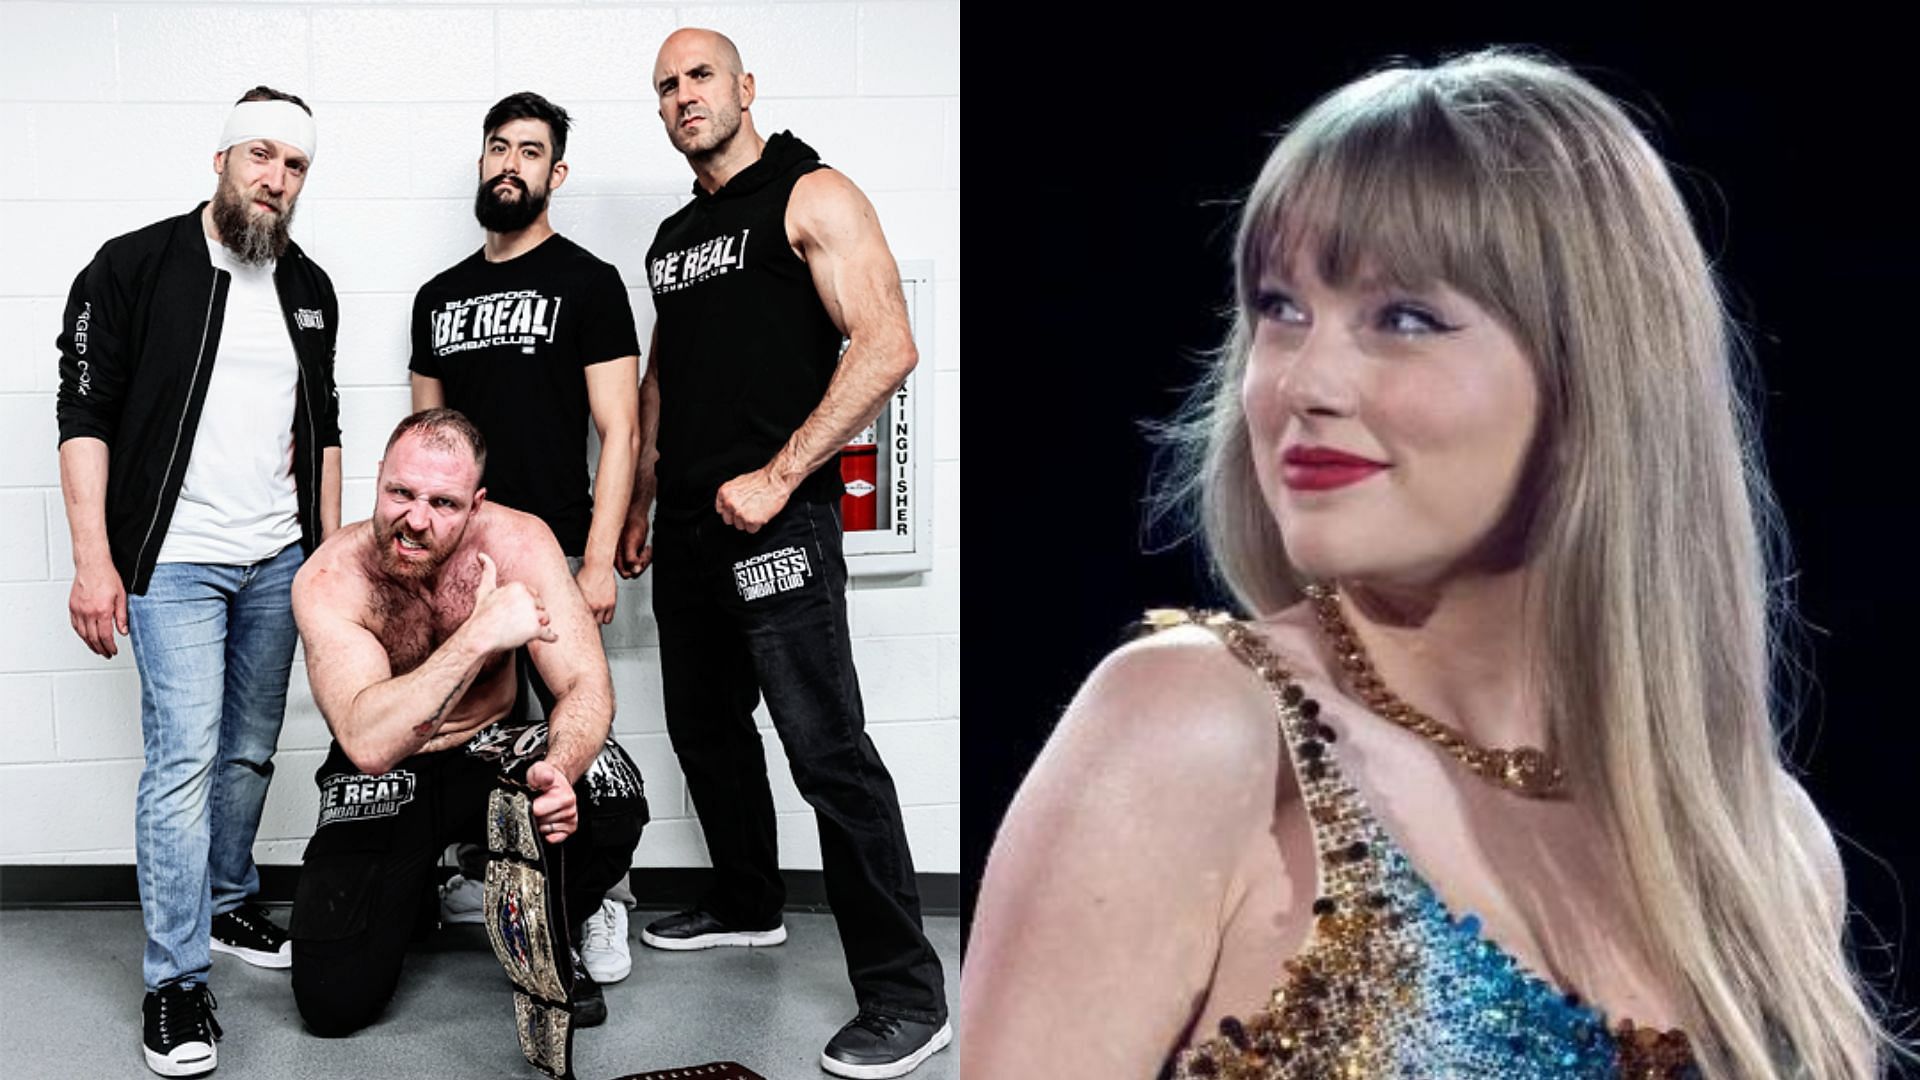 The Blackpool Combat Club and Taylor Swift together? What?